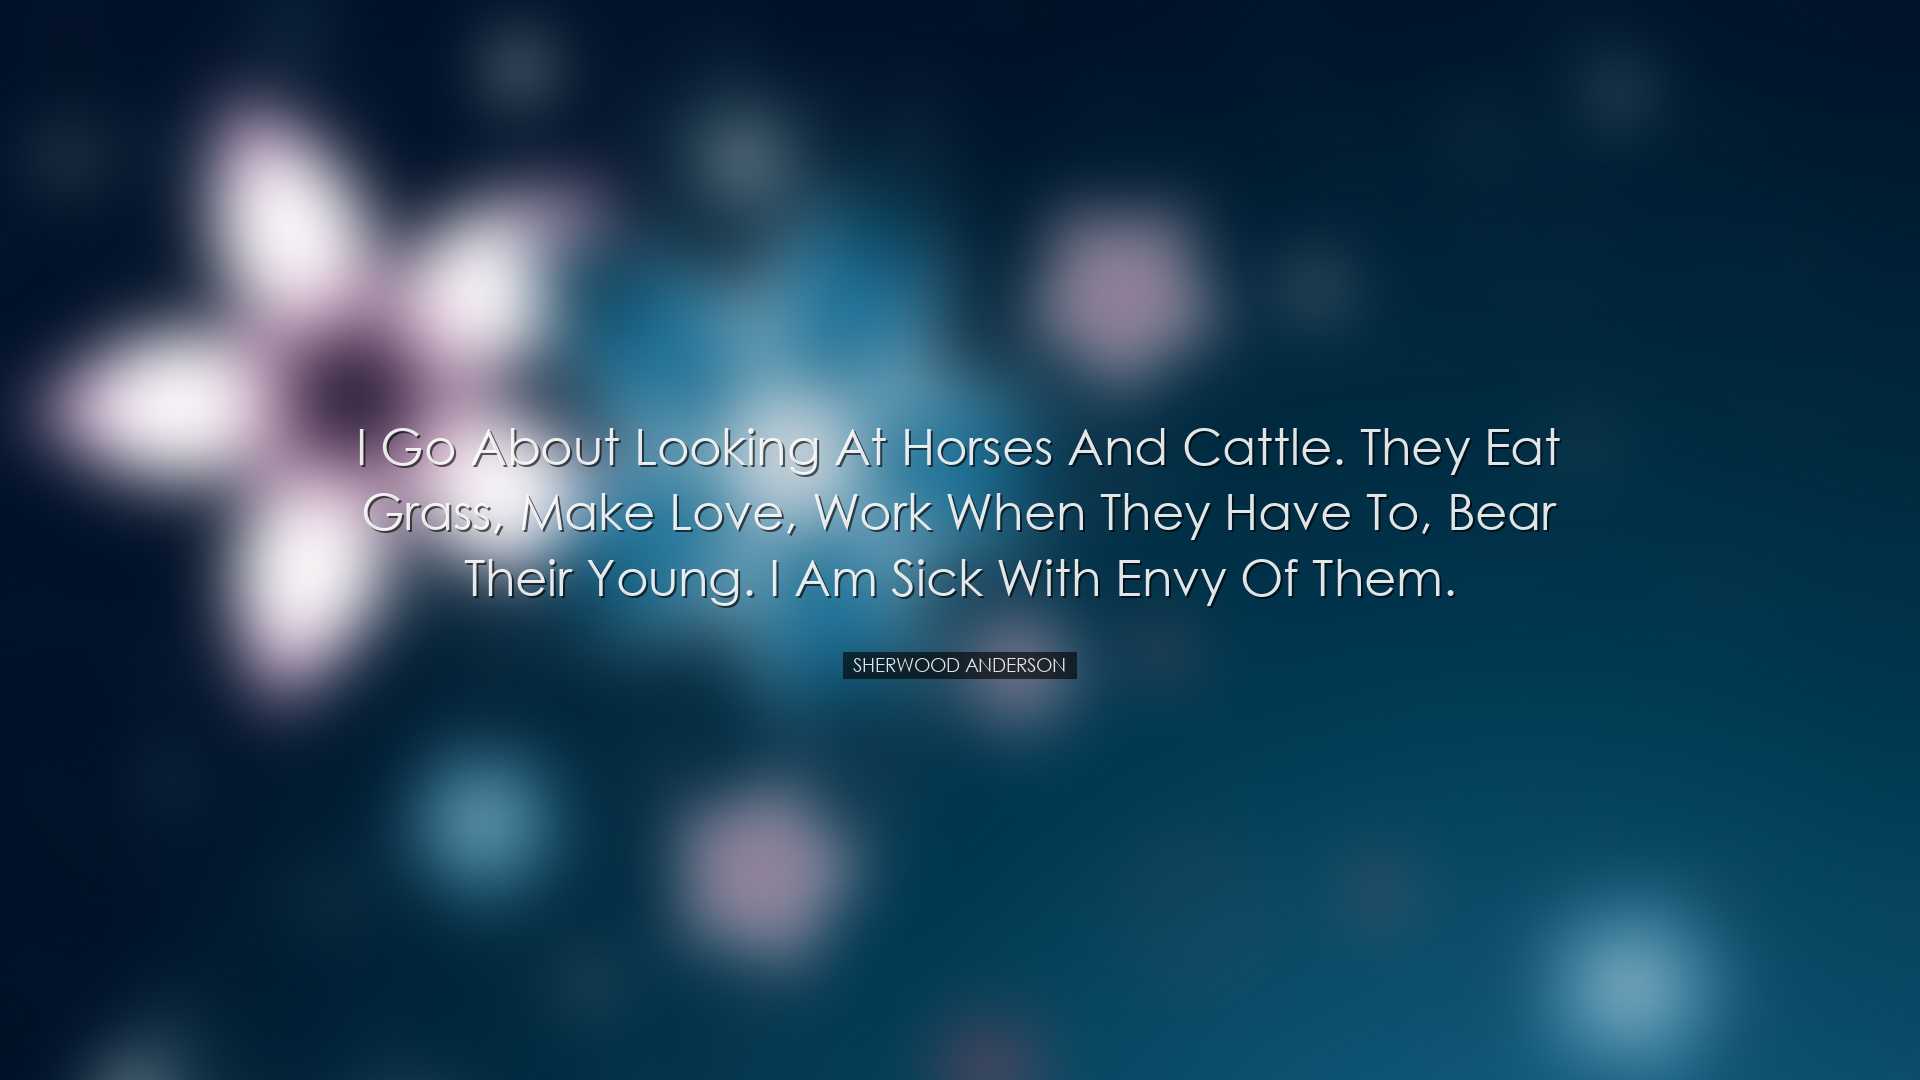 I go about looking at horses and cattle. They eat grass, make love